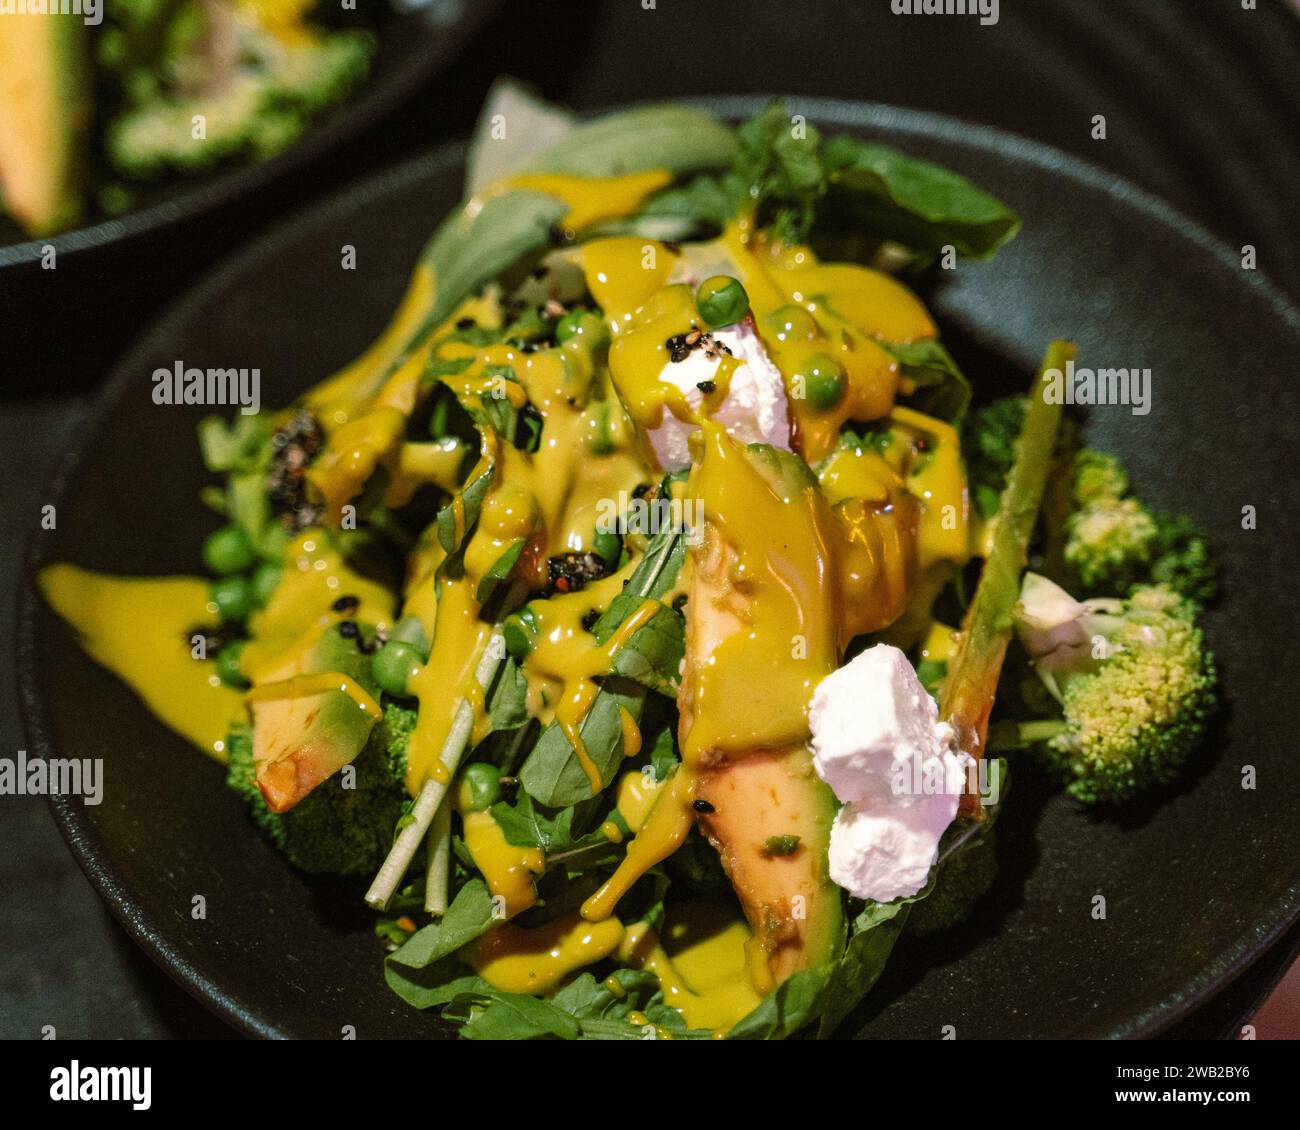 A delicious plate of food consisting of broccoli, onions, and cheese, served on a black plate Stock Photo